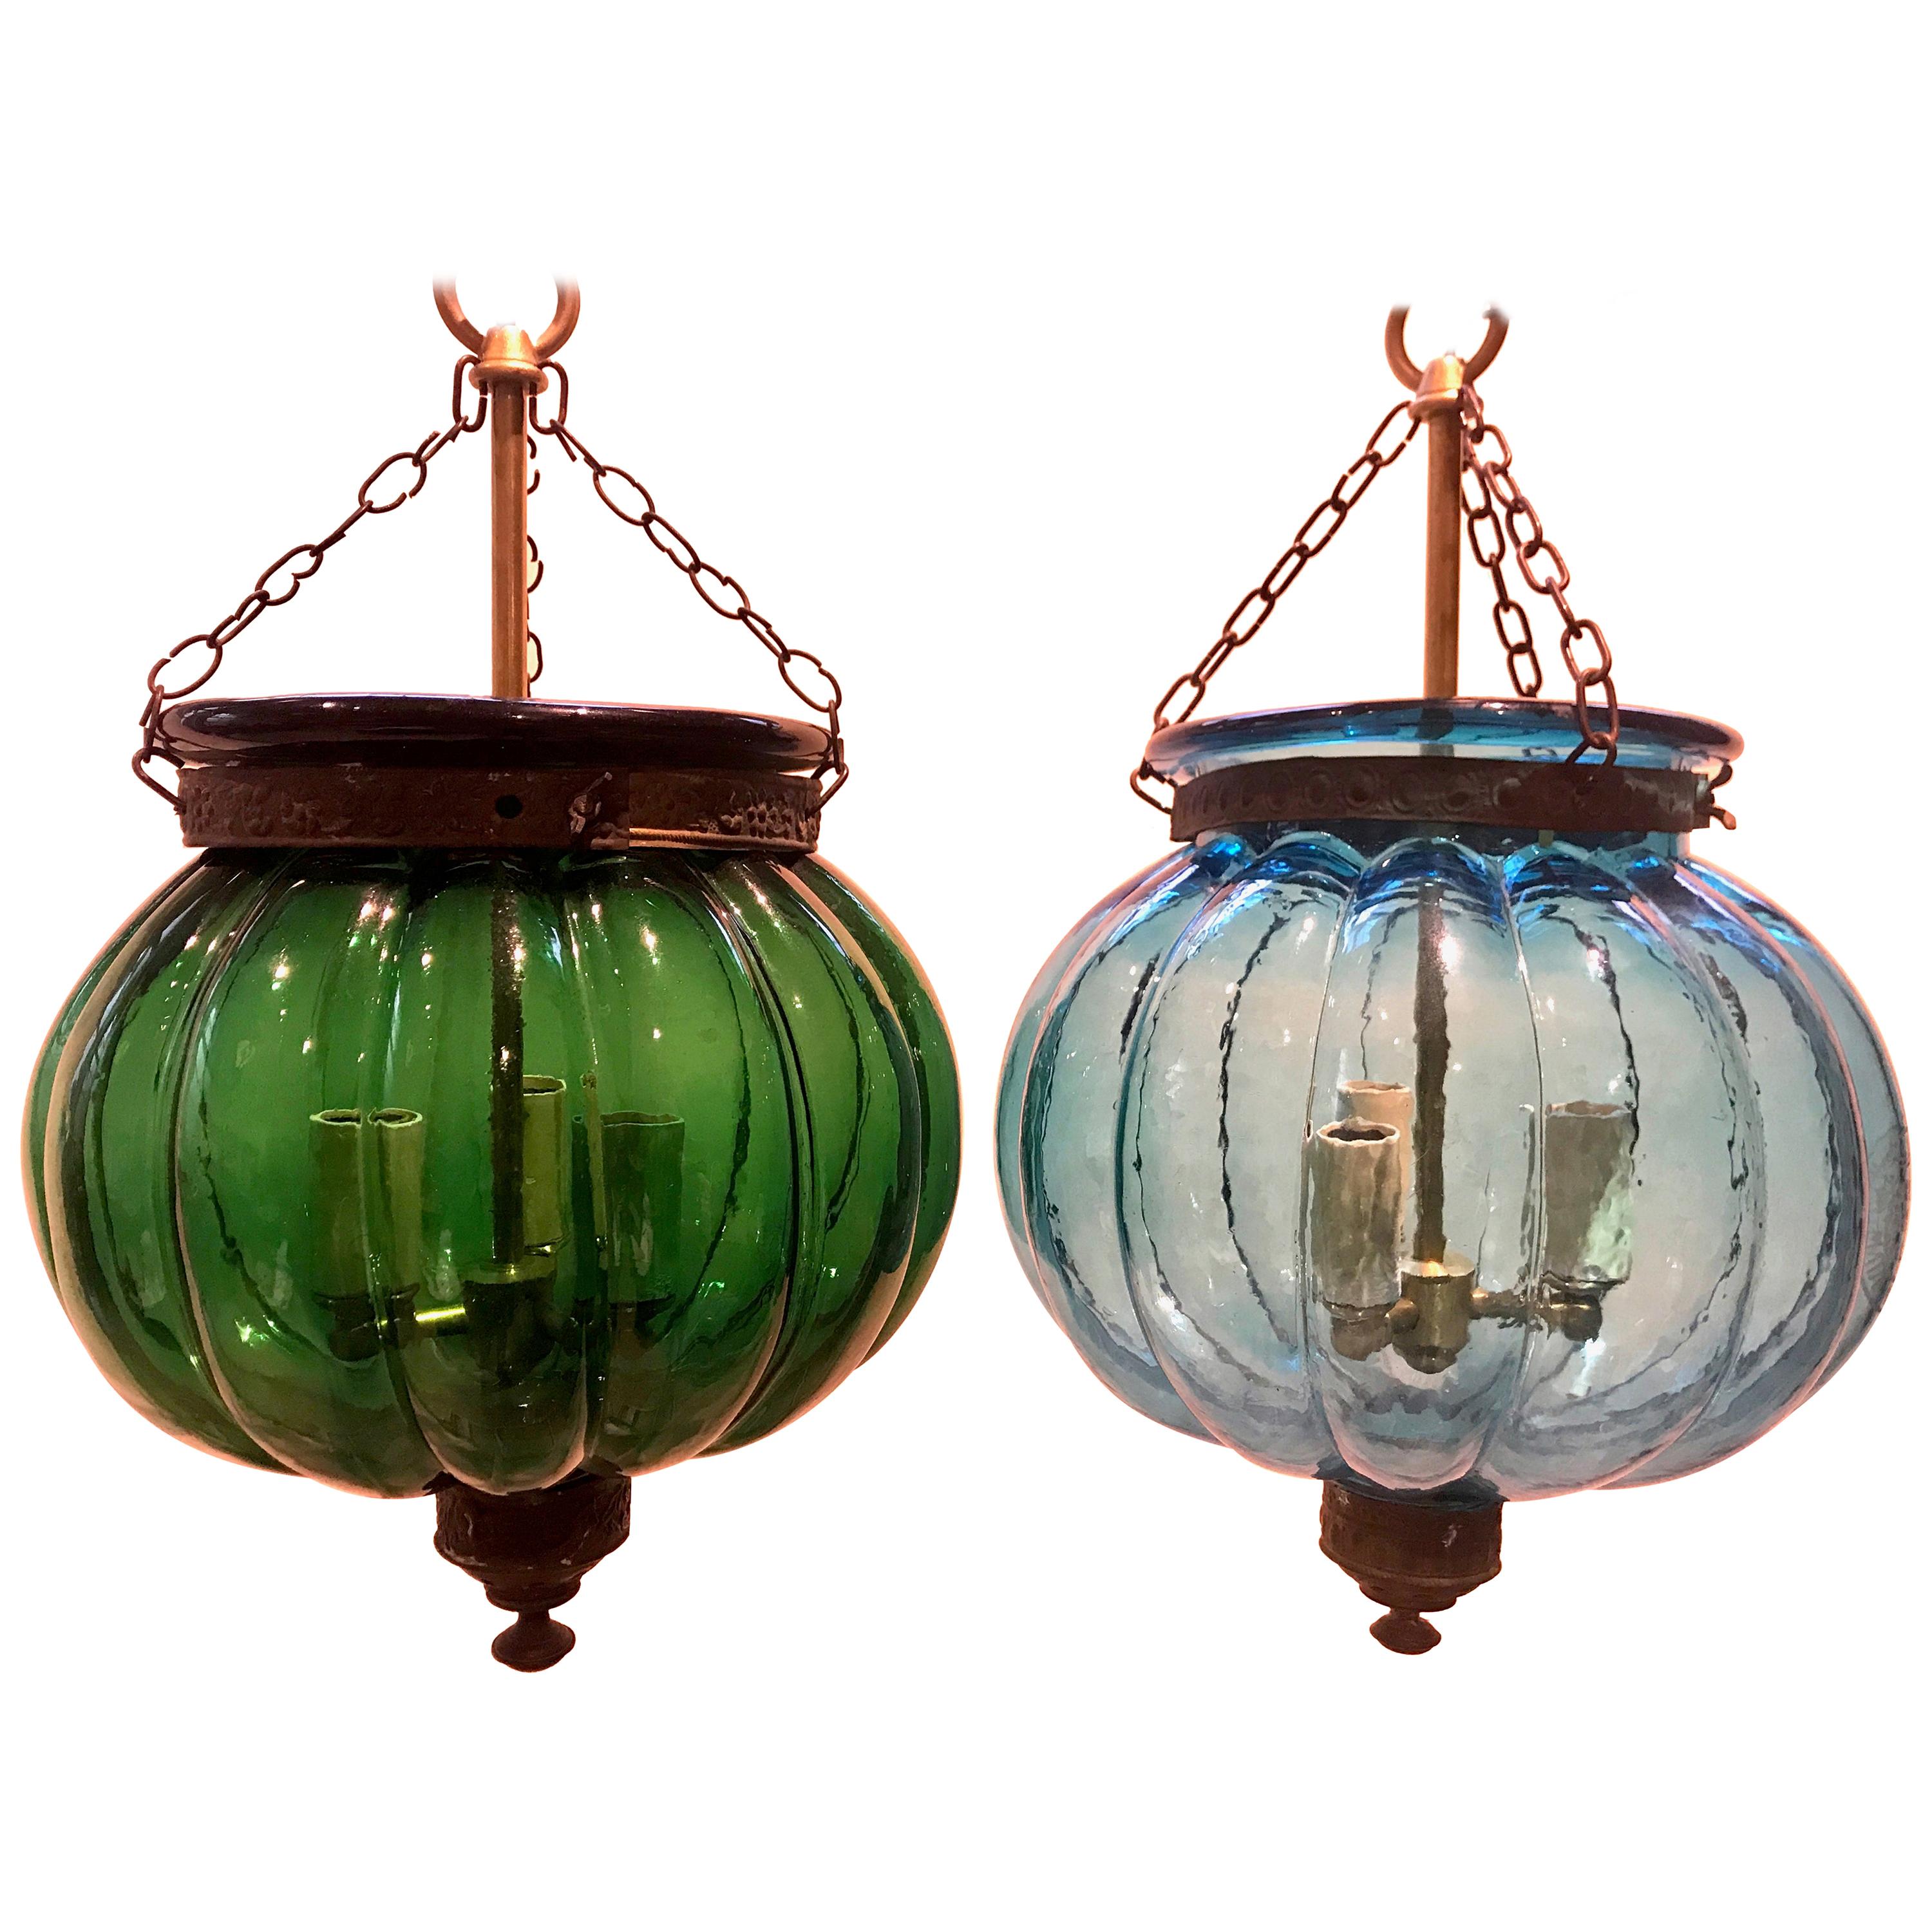 Two Antique Anglo Indian Bell Jar Glass Lanterns in Unusual Melon Shape For Sale